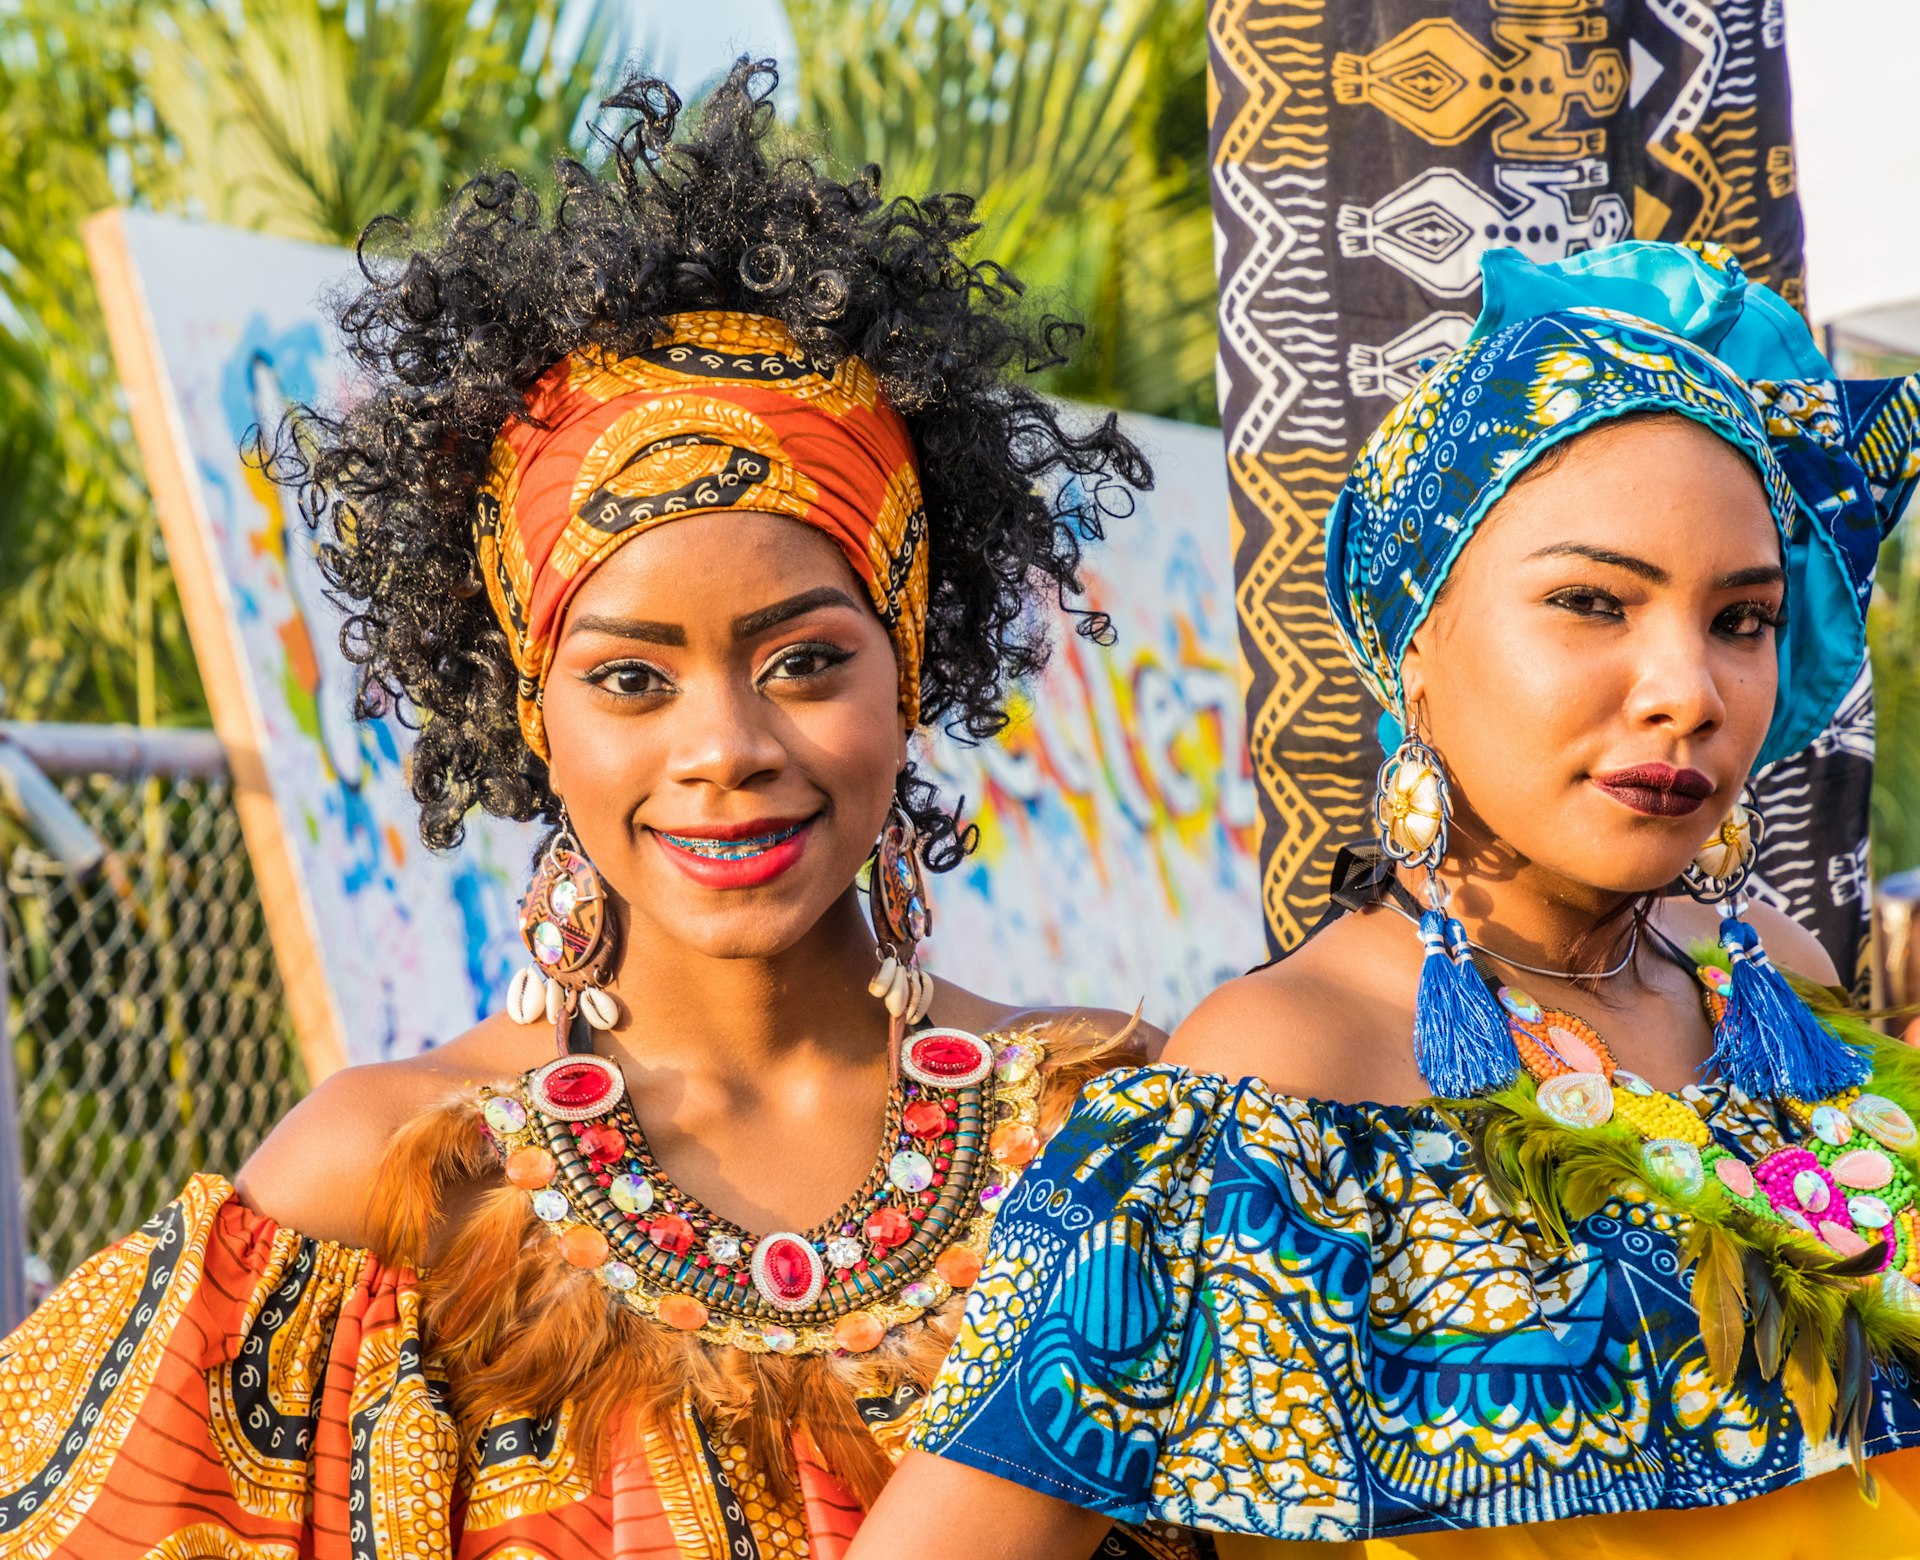 Two women wearing colorful tradition garb and head scarves pose for the camera in Panama City